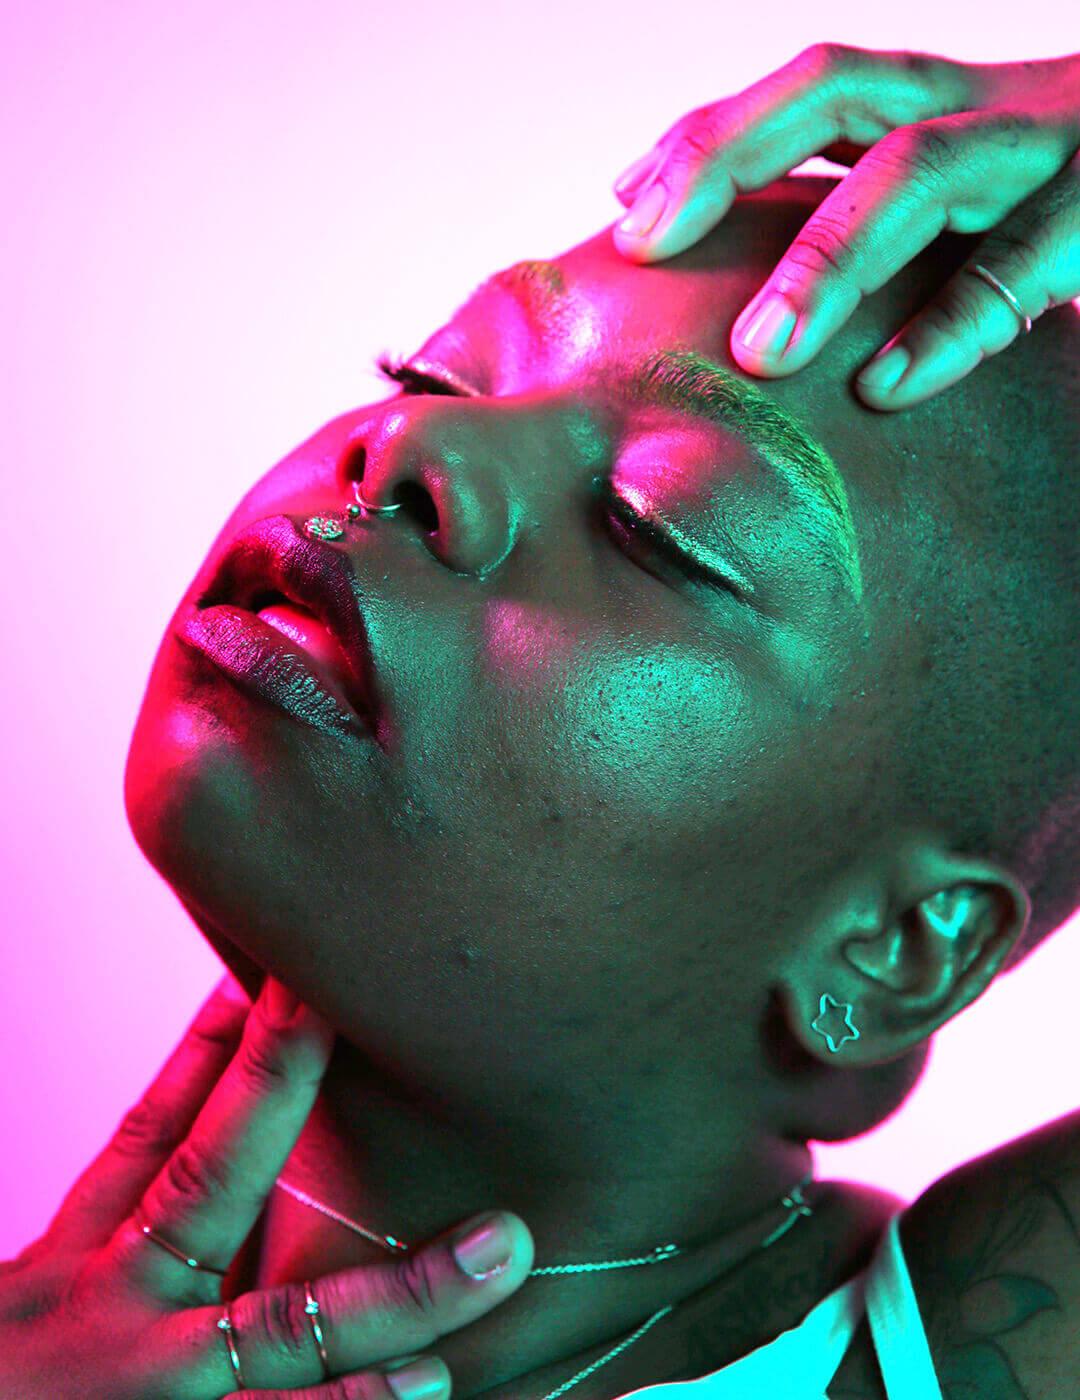 A close-up photo of a woman with a shaved head, her head slightly tilted upward, set against a background illuminated in a soft pink hue infused with AI-driven skincare